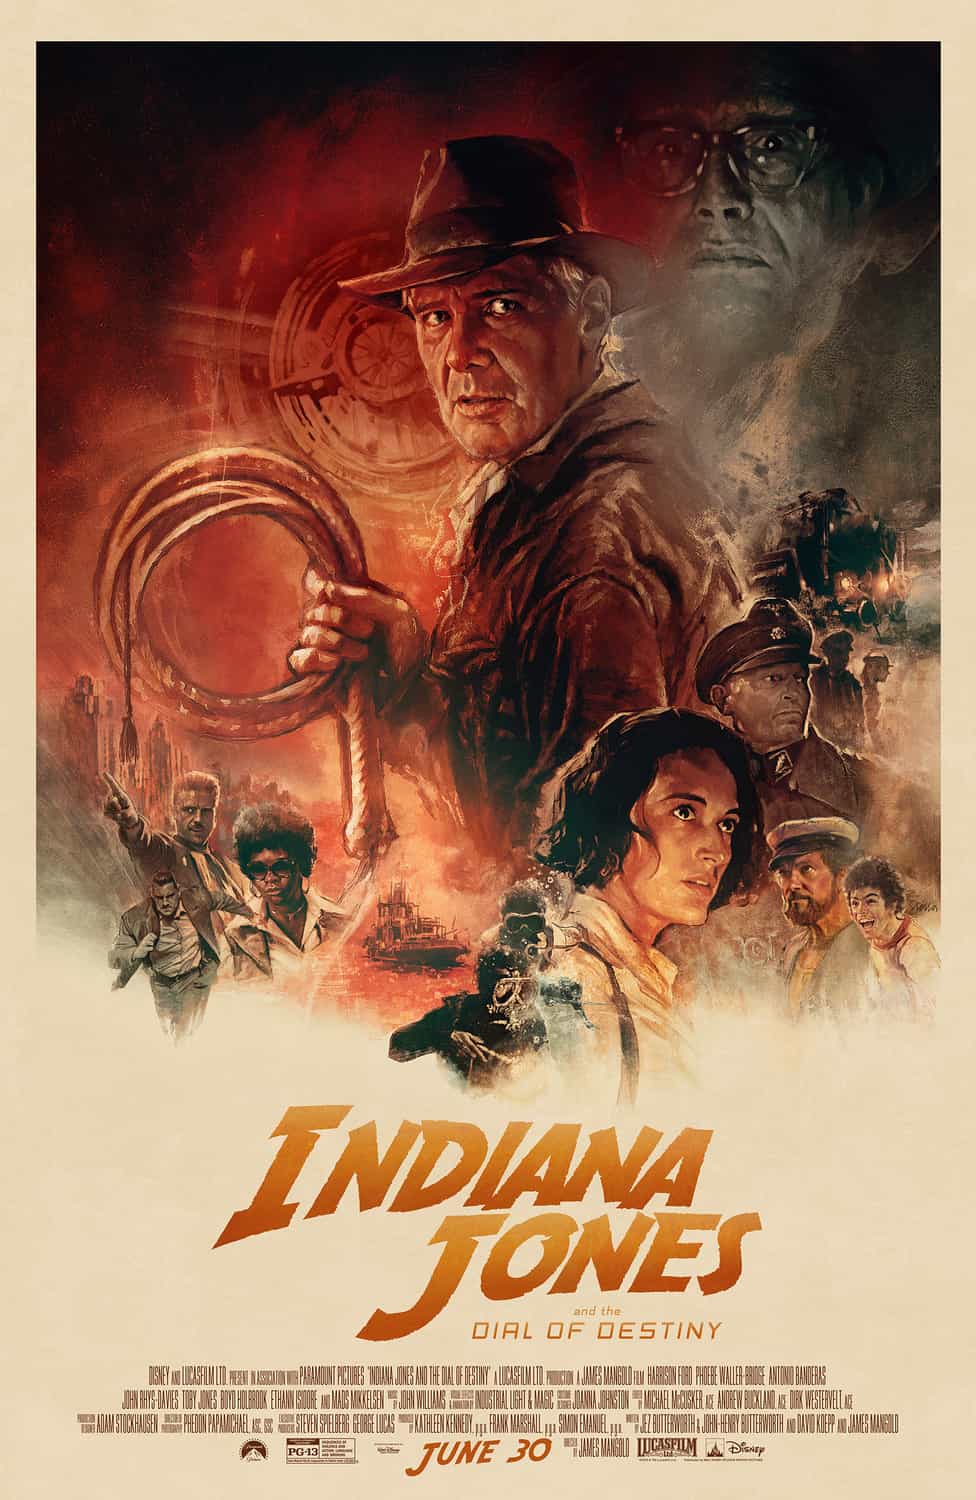 New poster has been released for Indiana Jones and the Dial of Destiny which stars Harrison Ford and Phoebe Waller-Bridge - movie UK release date 30th June 2023 #indianajonesandthedialofdestiny